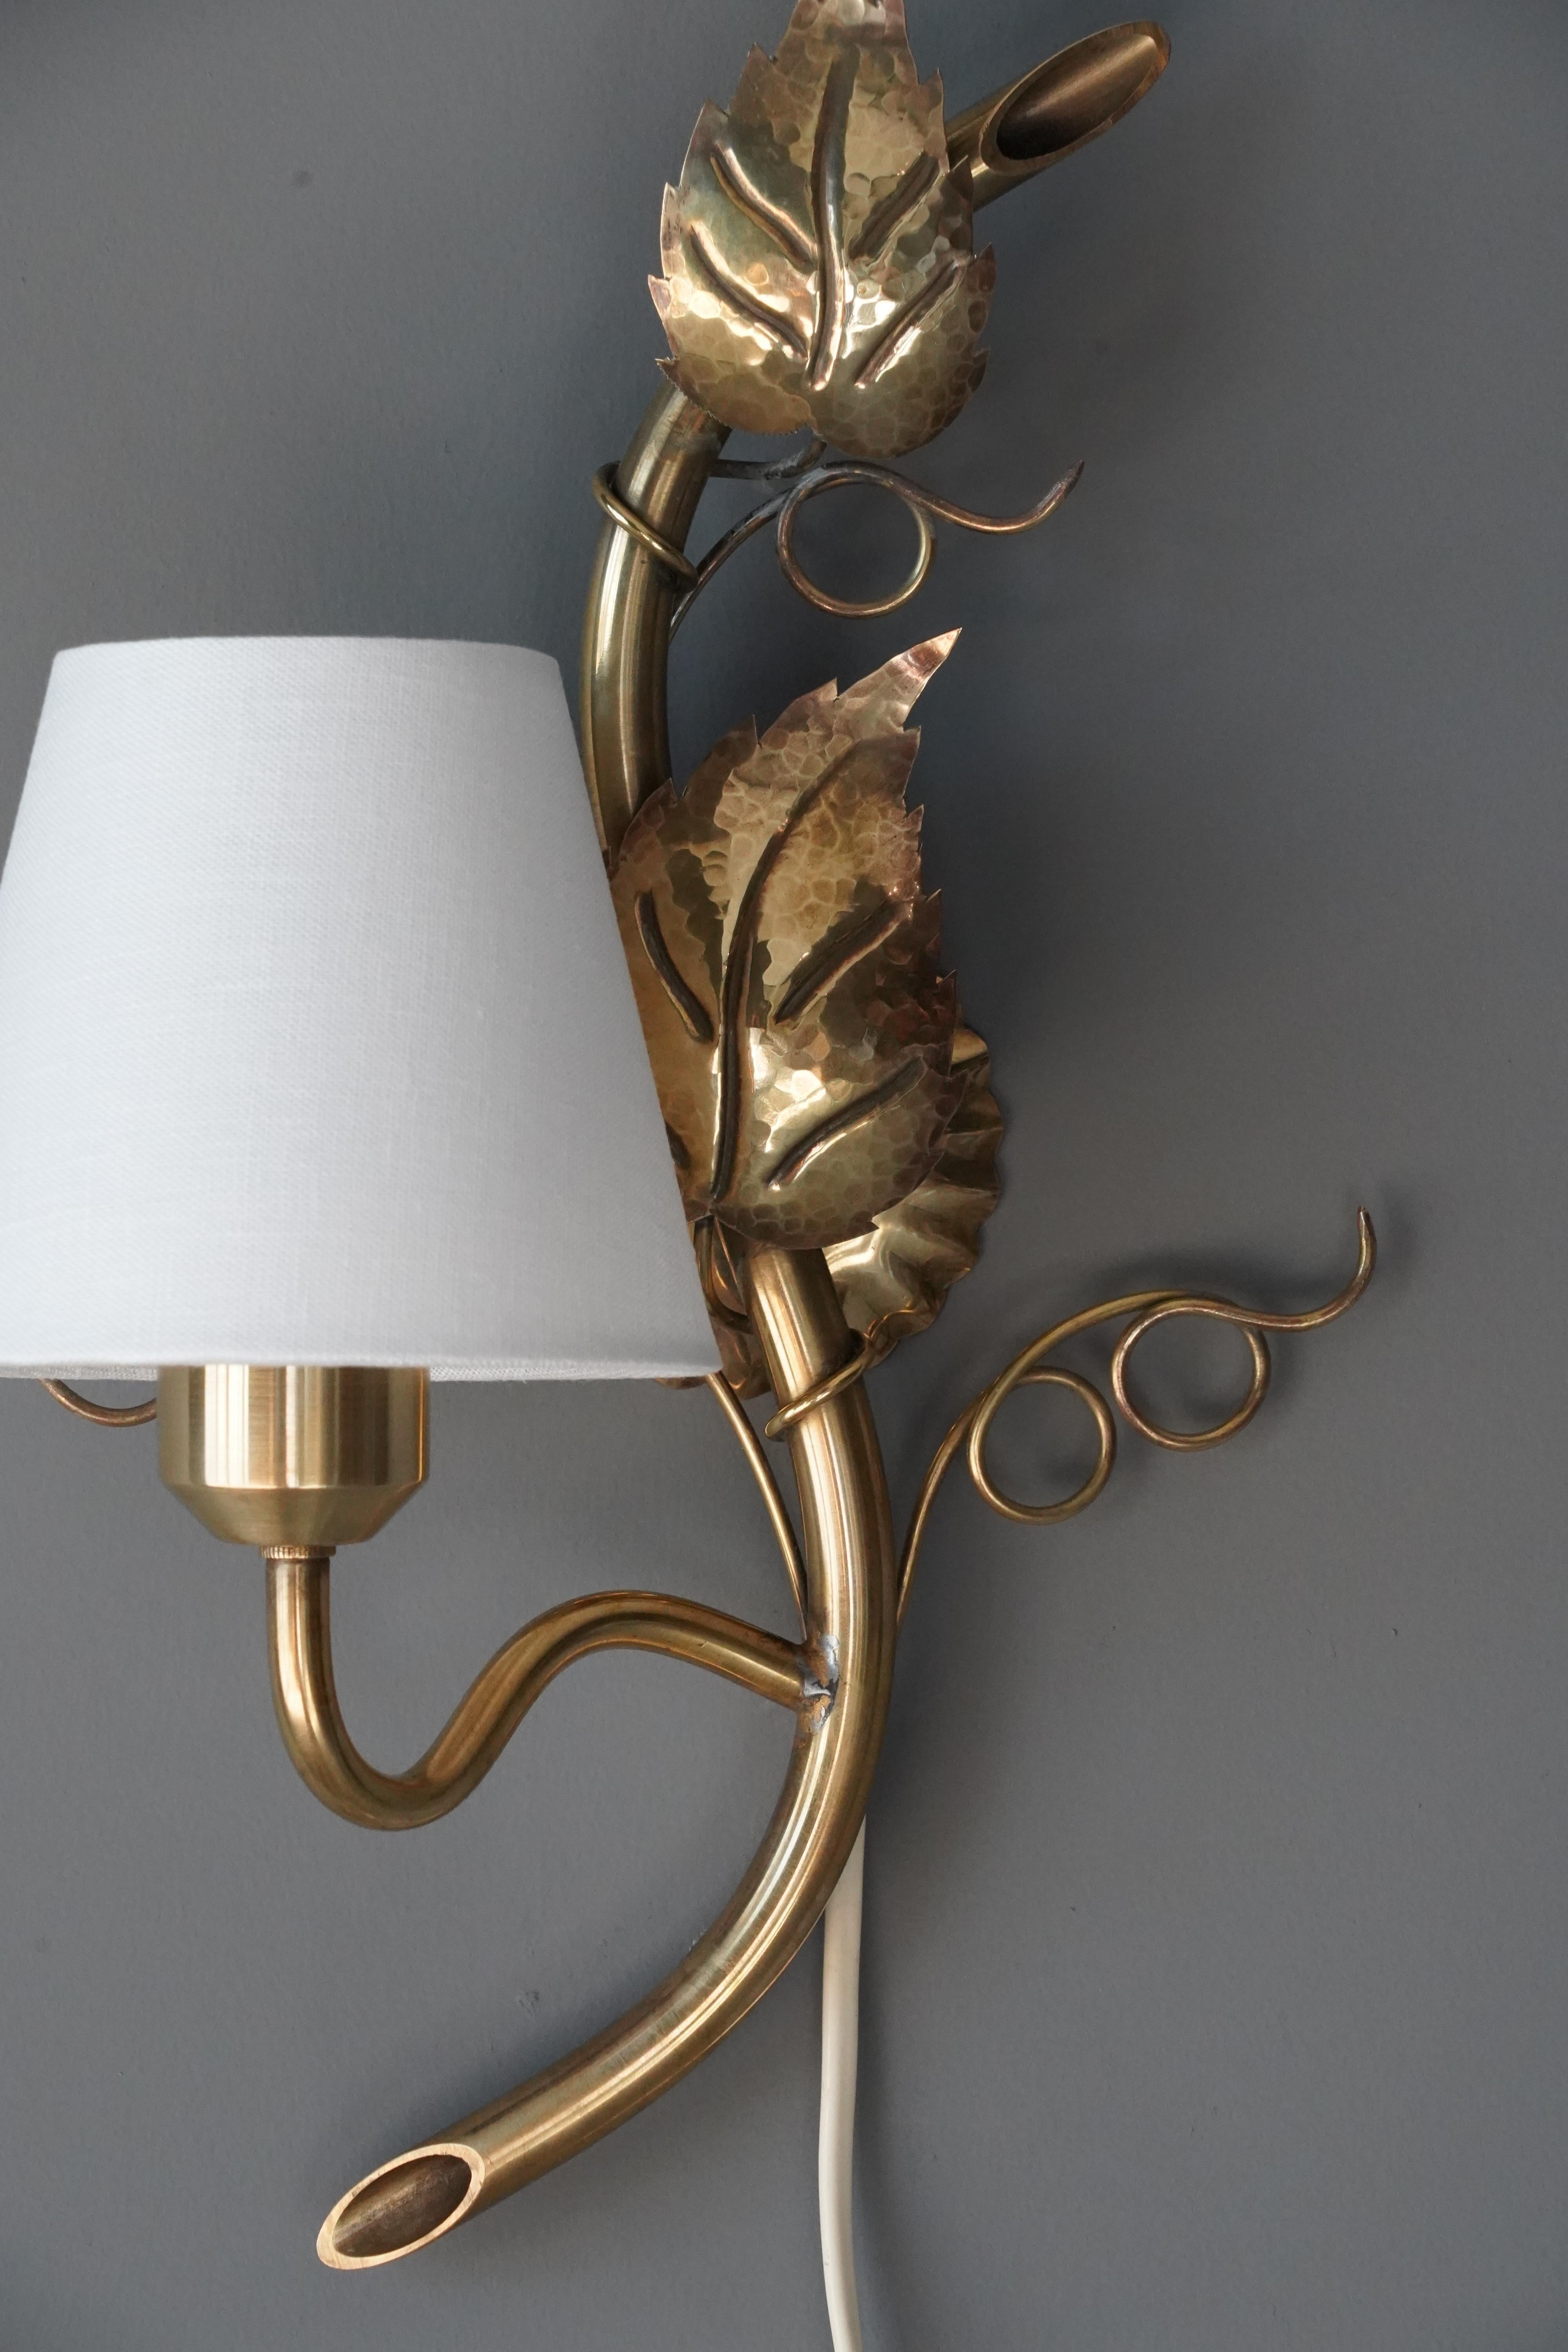 A wall light. Designed and produced in Sweden, c. 1940s-1950s. Features brass and brand new white fabric lampshade.

Dimensions include shade. Shade is included in purchase. Configured for plug in. Please review wiring upon installation.

